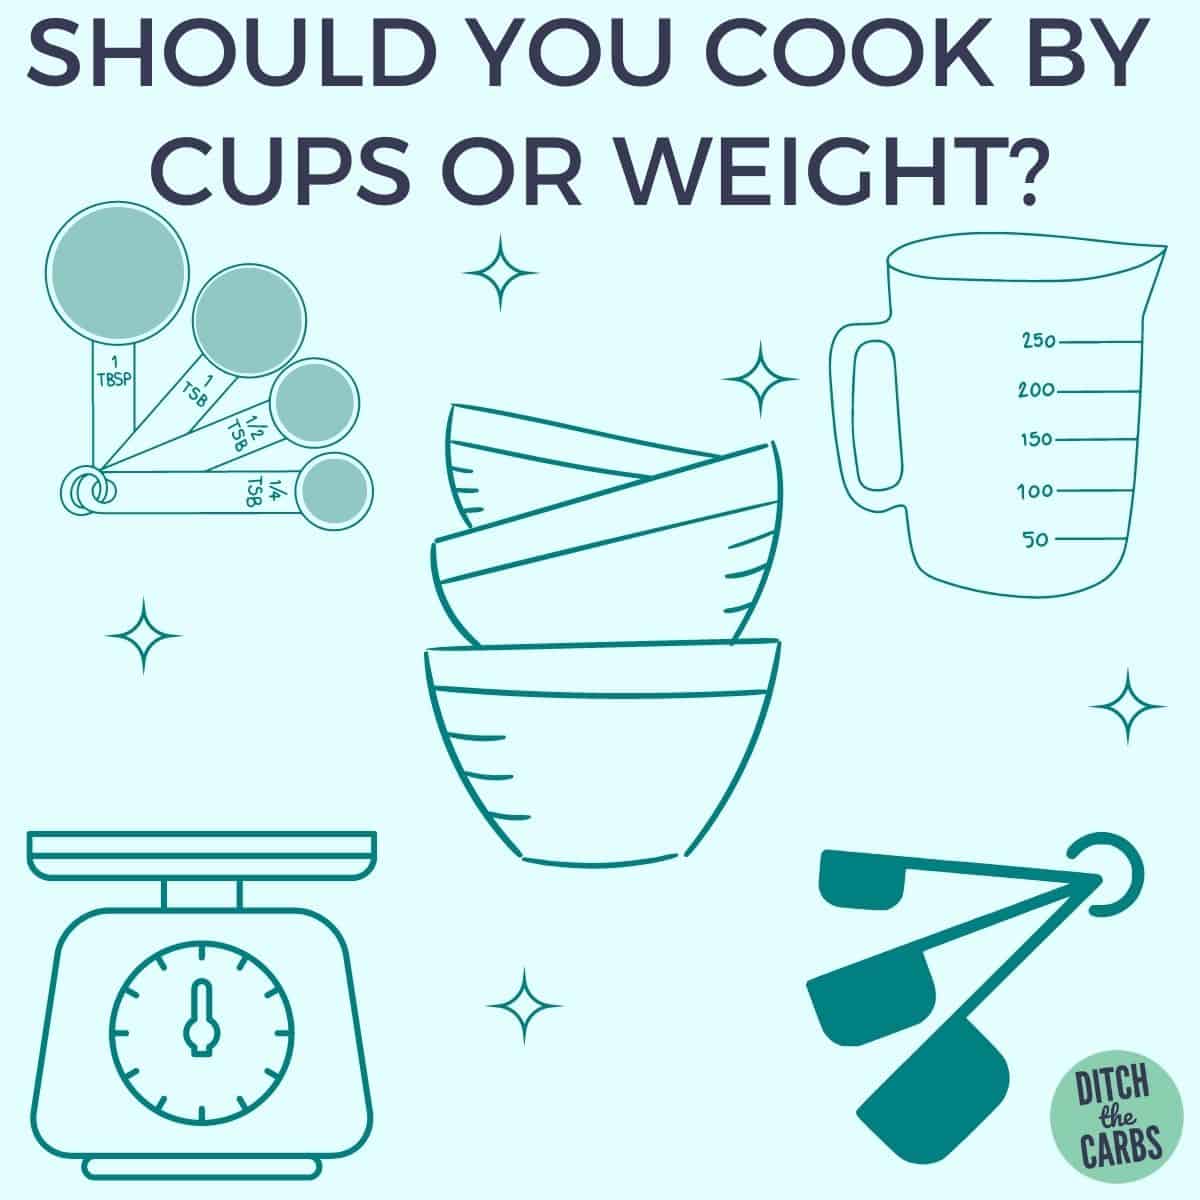 https://thinlicious.com/wp-content/uploads/2022/06/Should-You-Cook-By-Cups-or-Weight-1200x1200-1.jpg